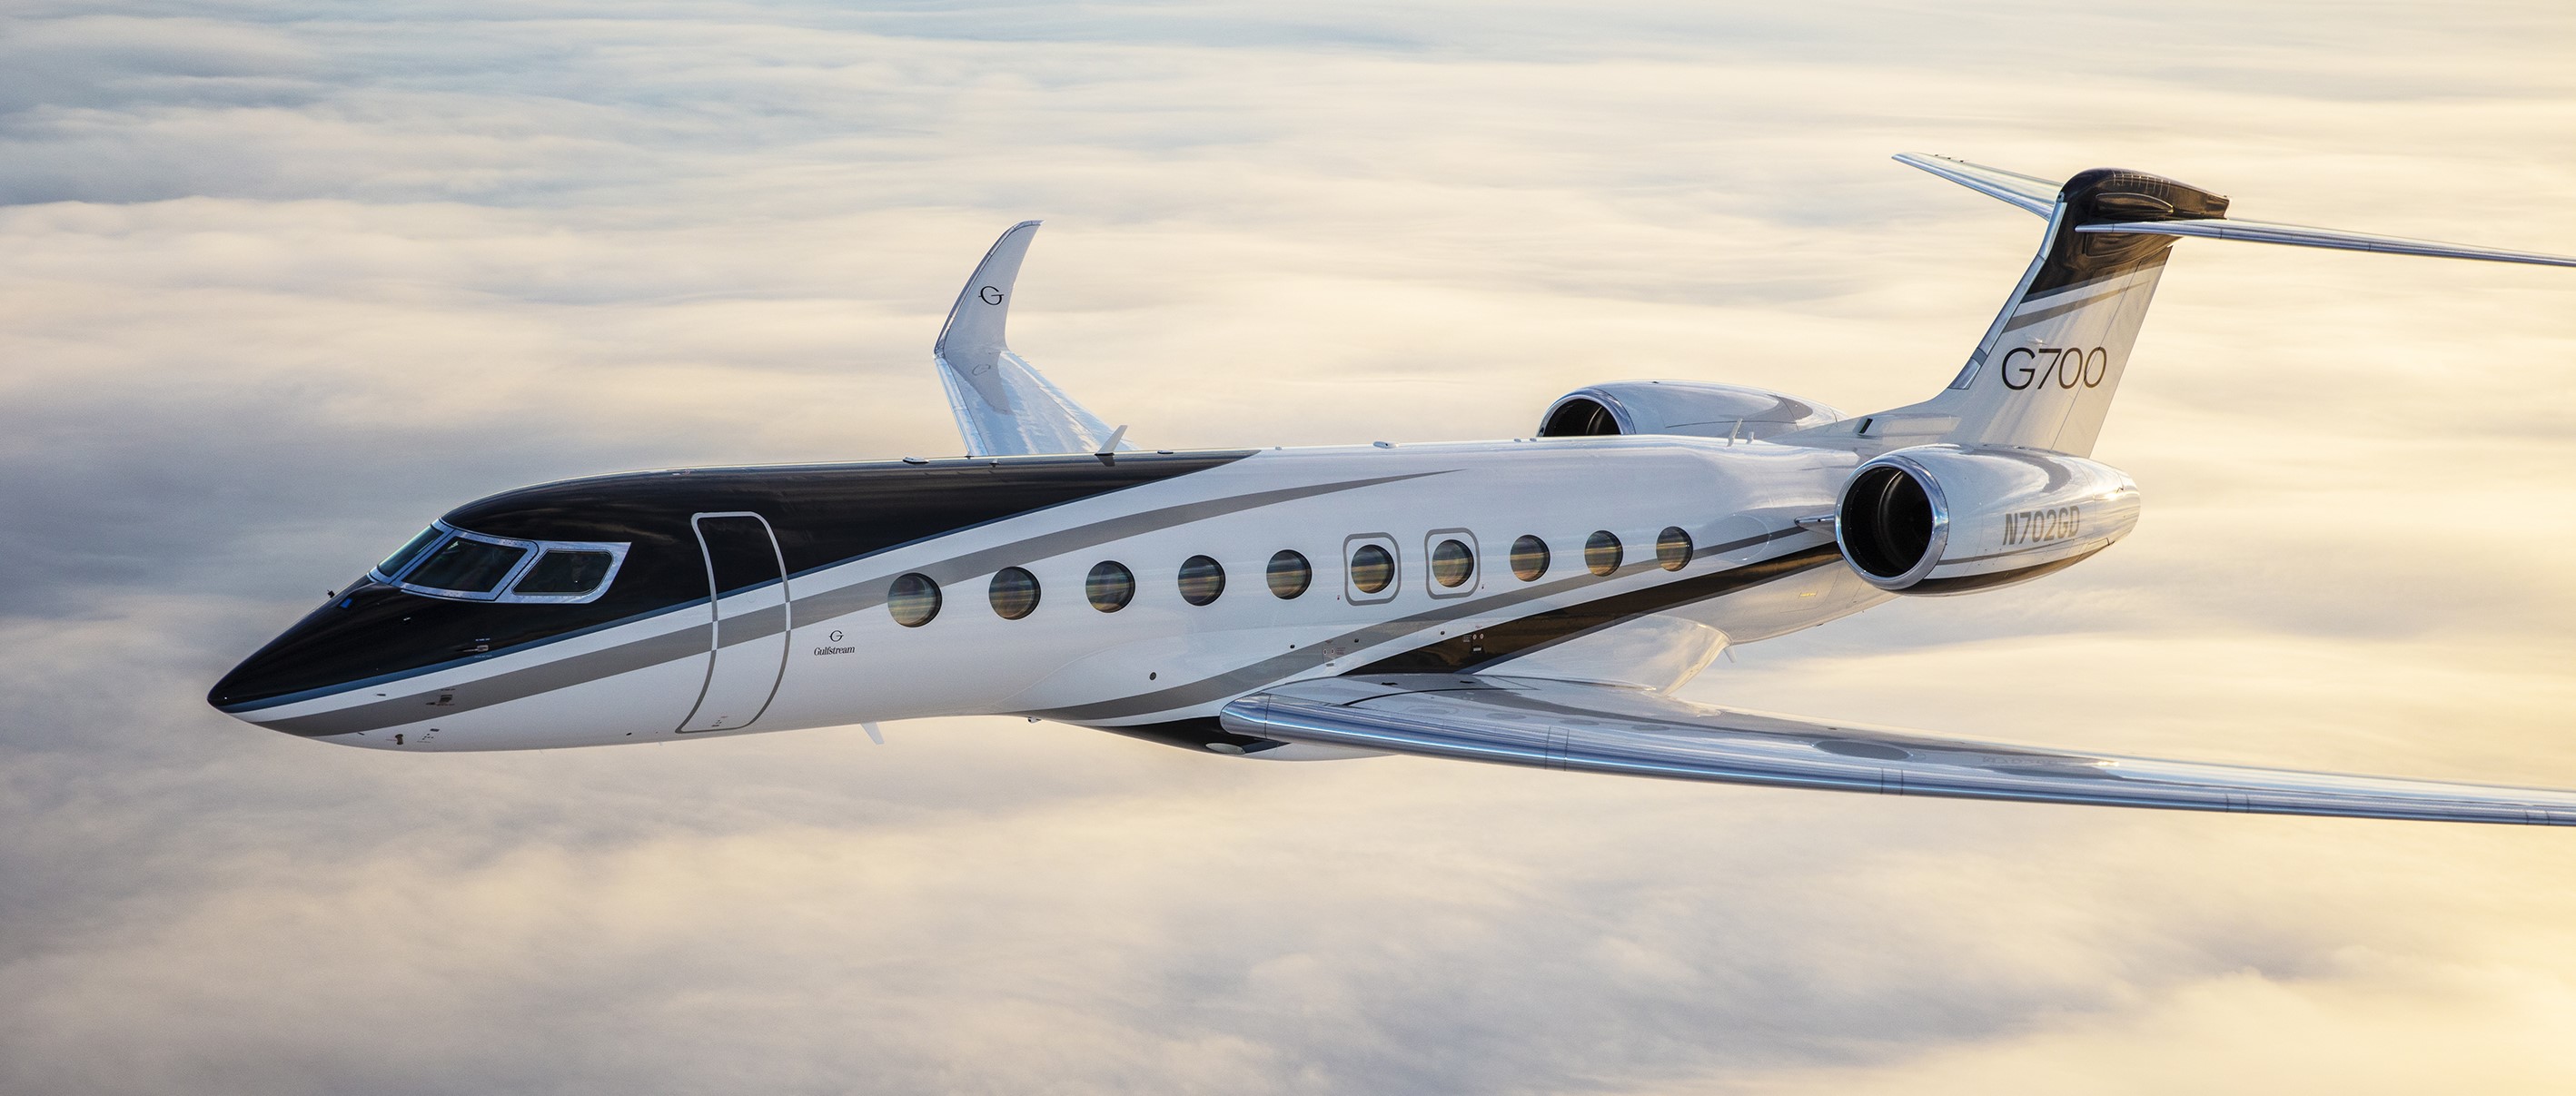 Long-awaited Gulfstream G700 has received FAA type certification, Customer deliveries to follow soon .